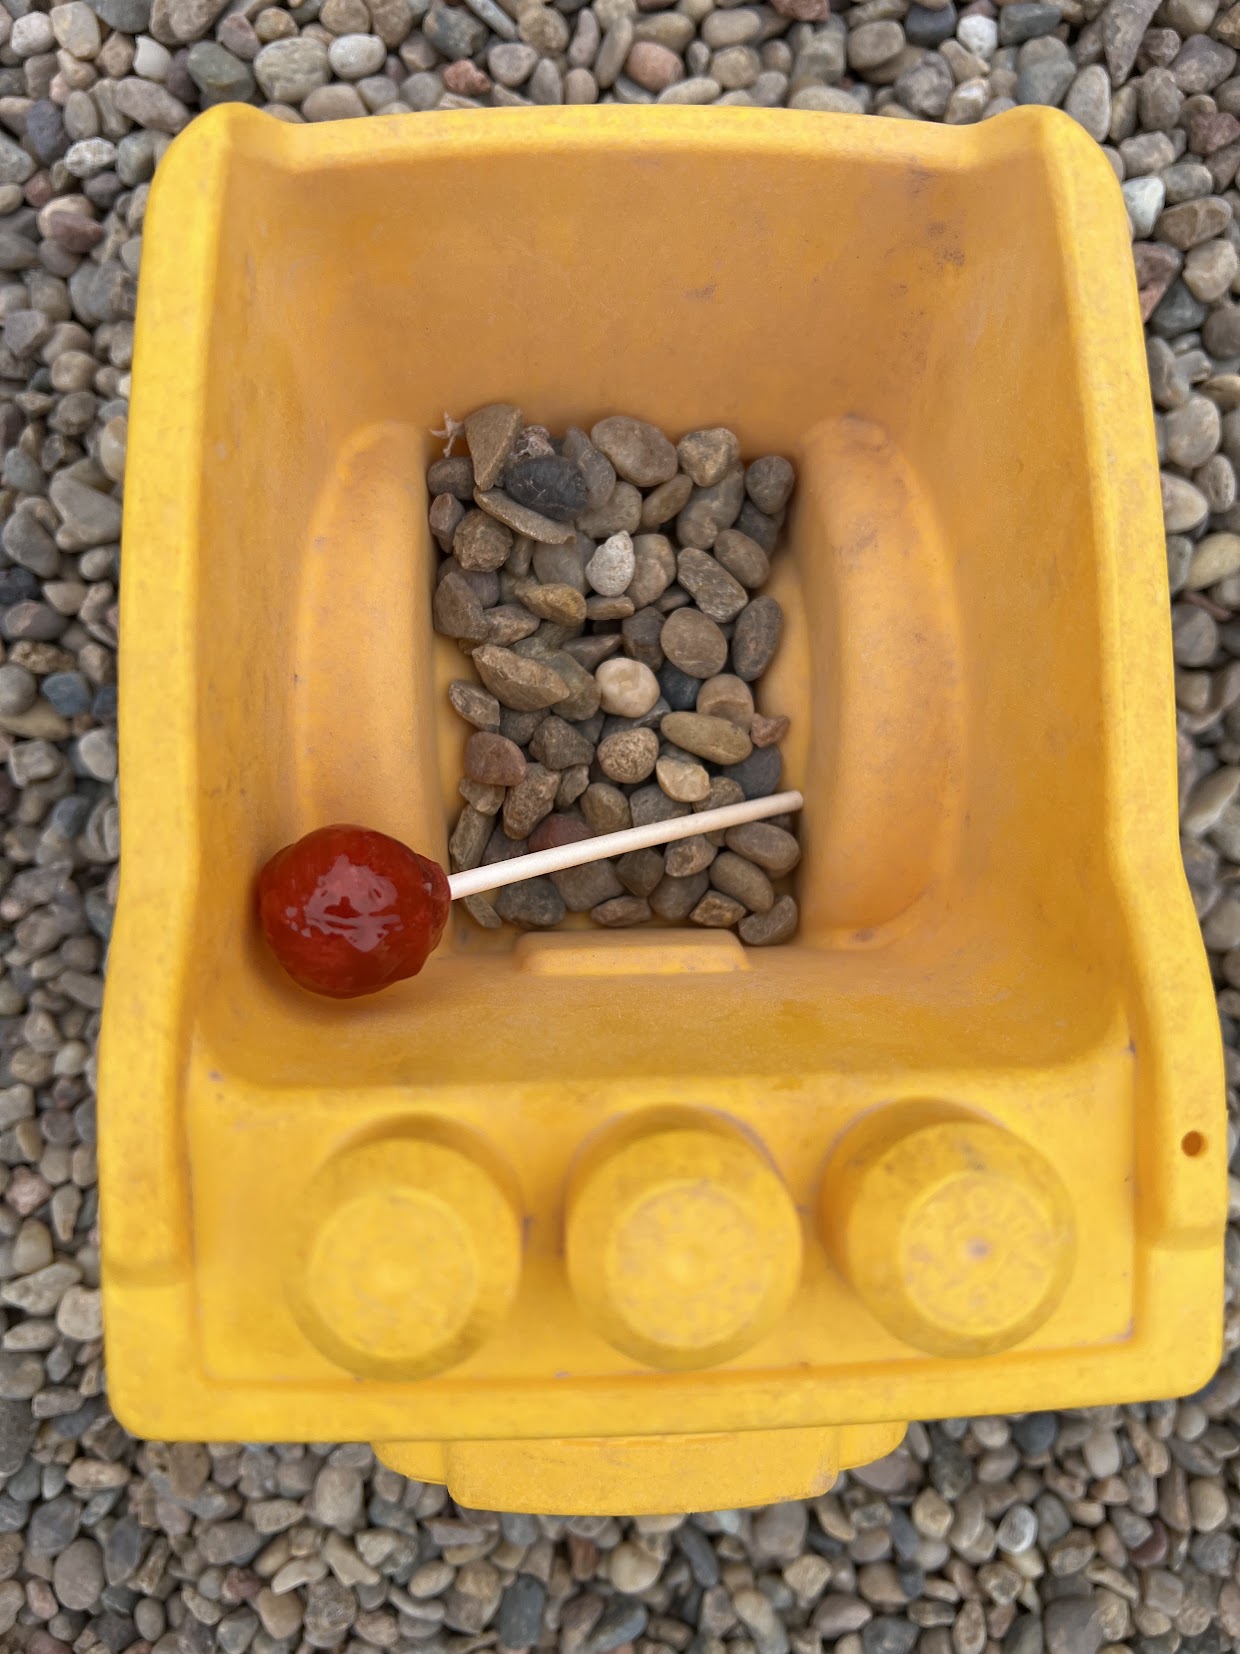 a lollipop in a yellow container with rocks